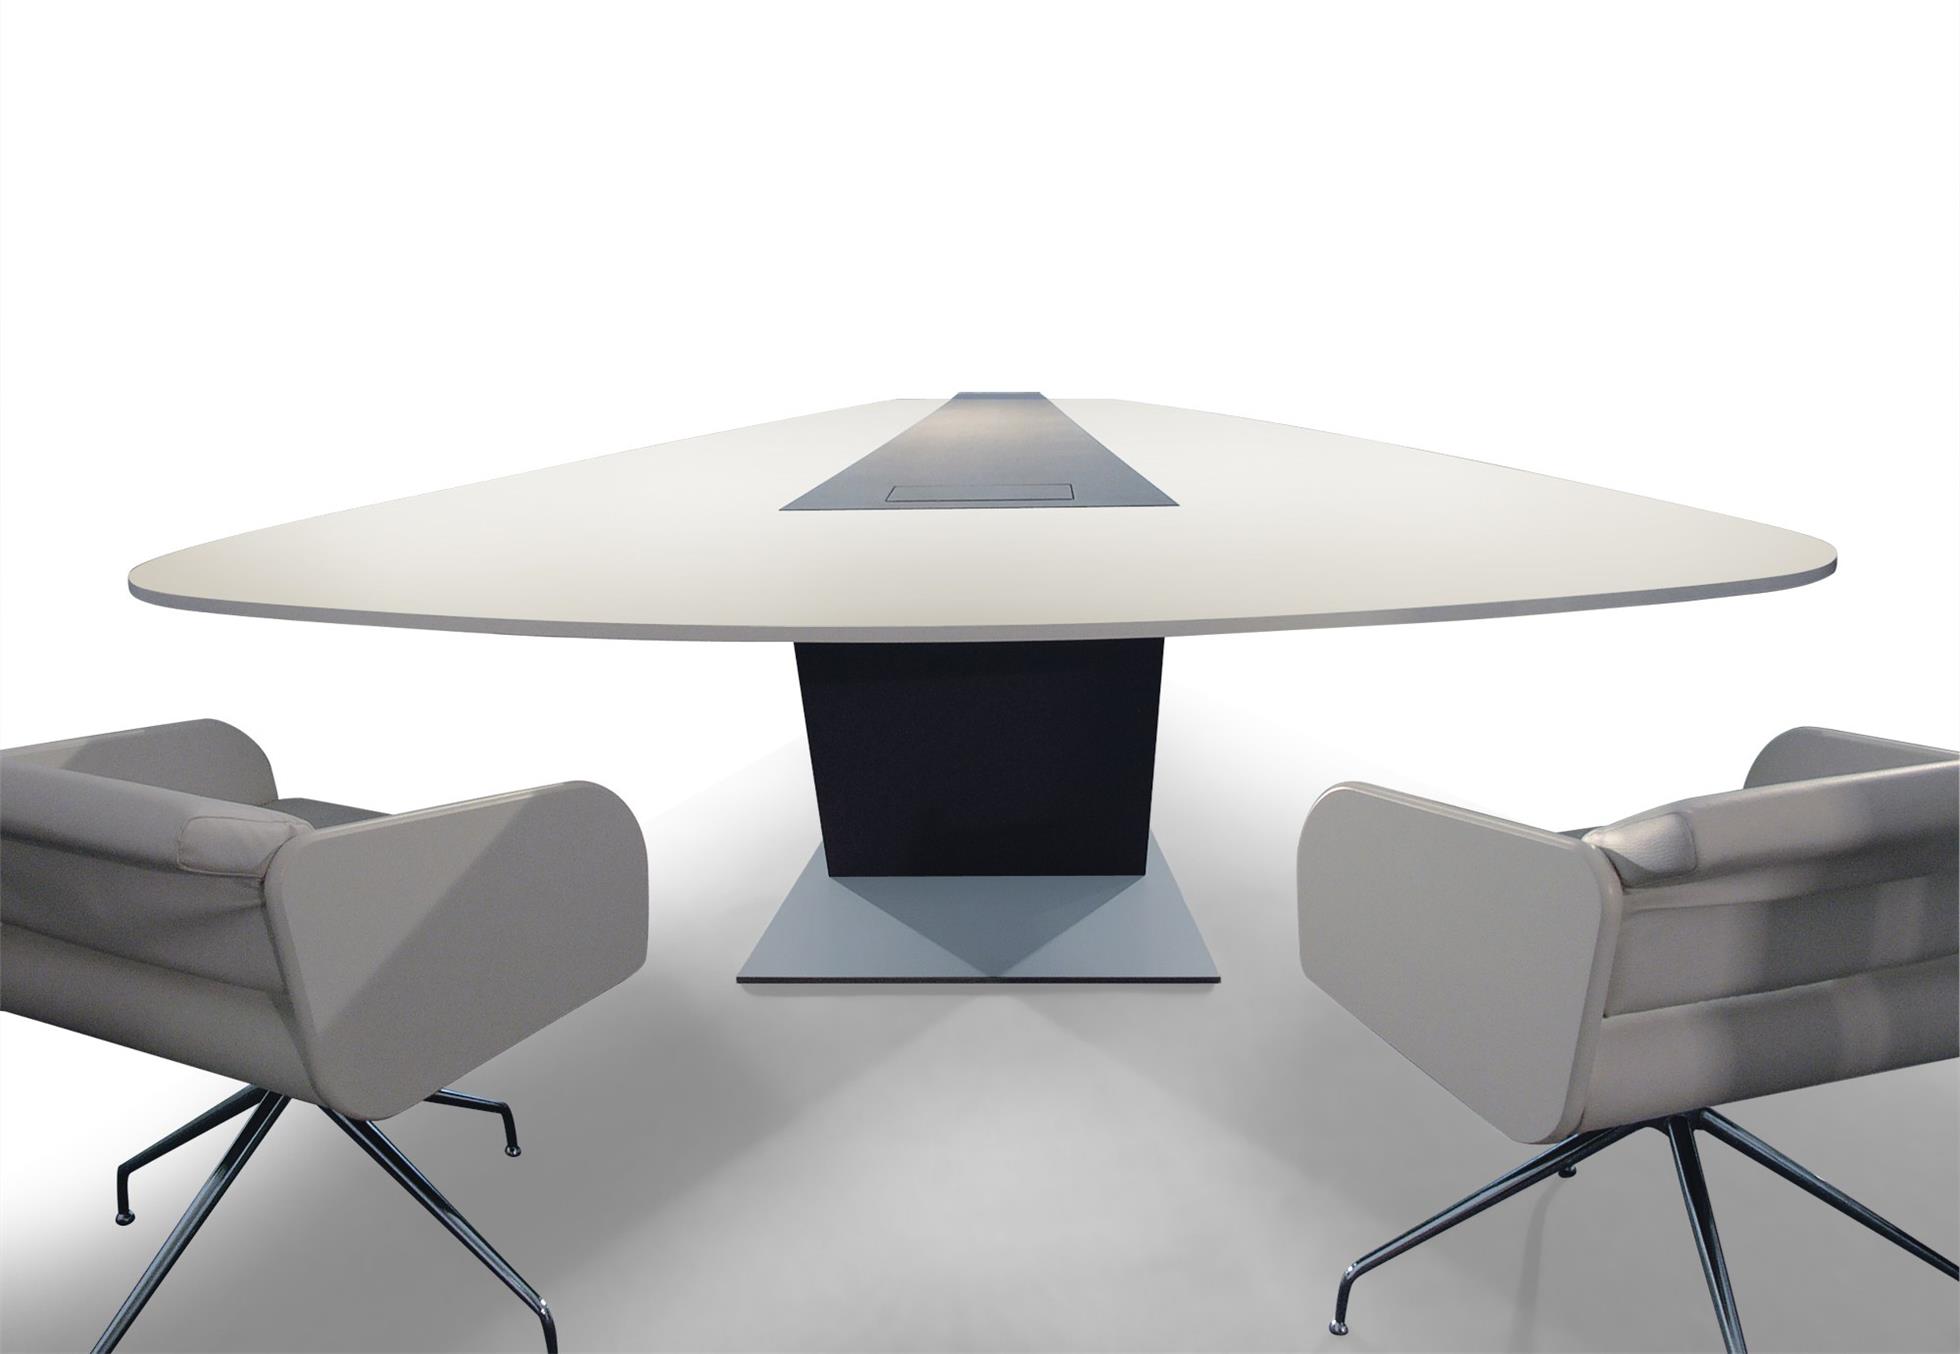 6 person luxury meeting room modern conference table